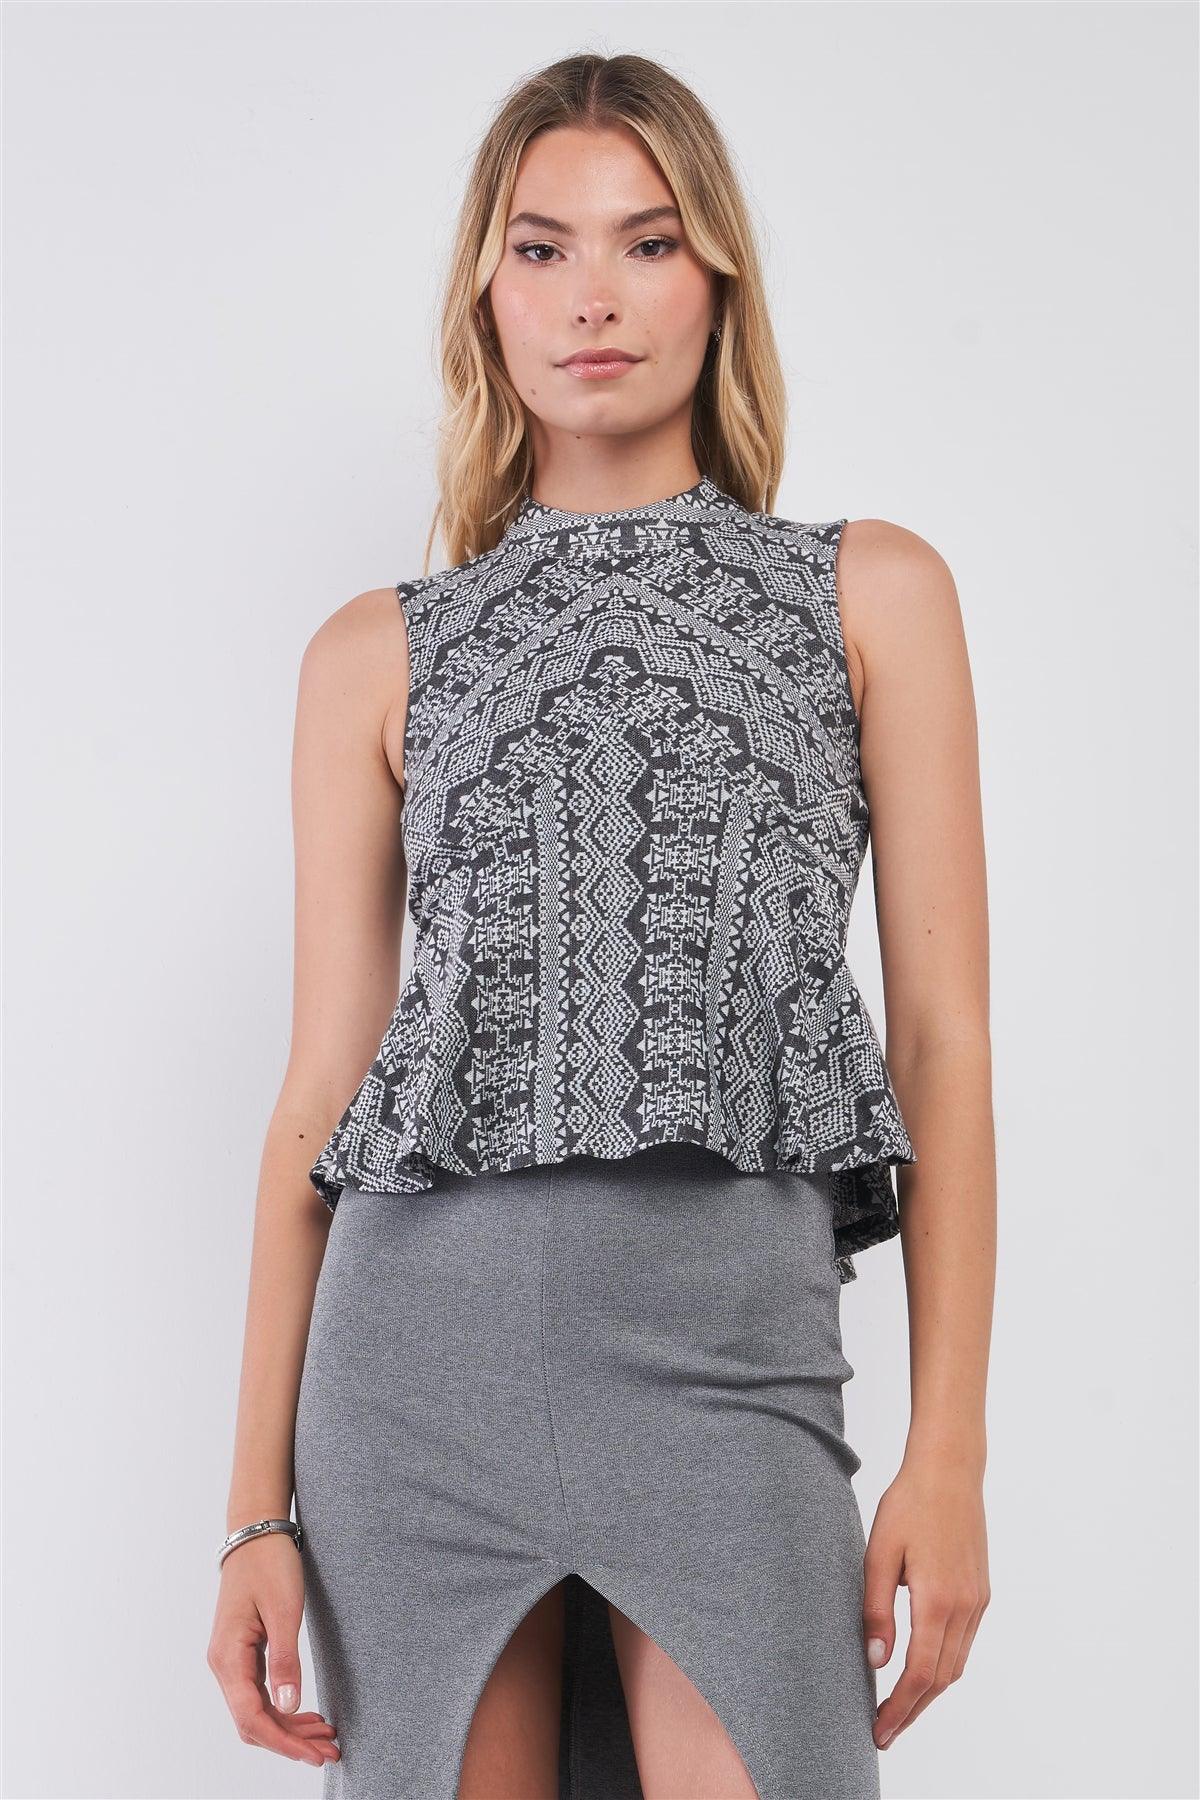 Charcoal Grey Damask-Inspired Geometric Pattern Print Sleeveless Mock Neck Fit & Flare Top /1-1-2-2